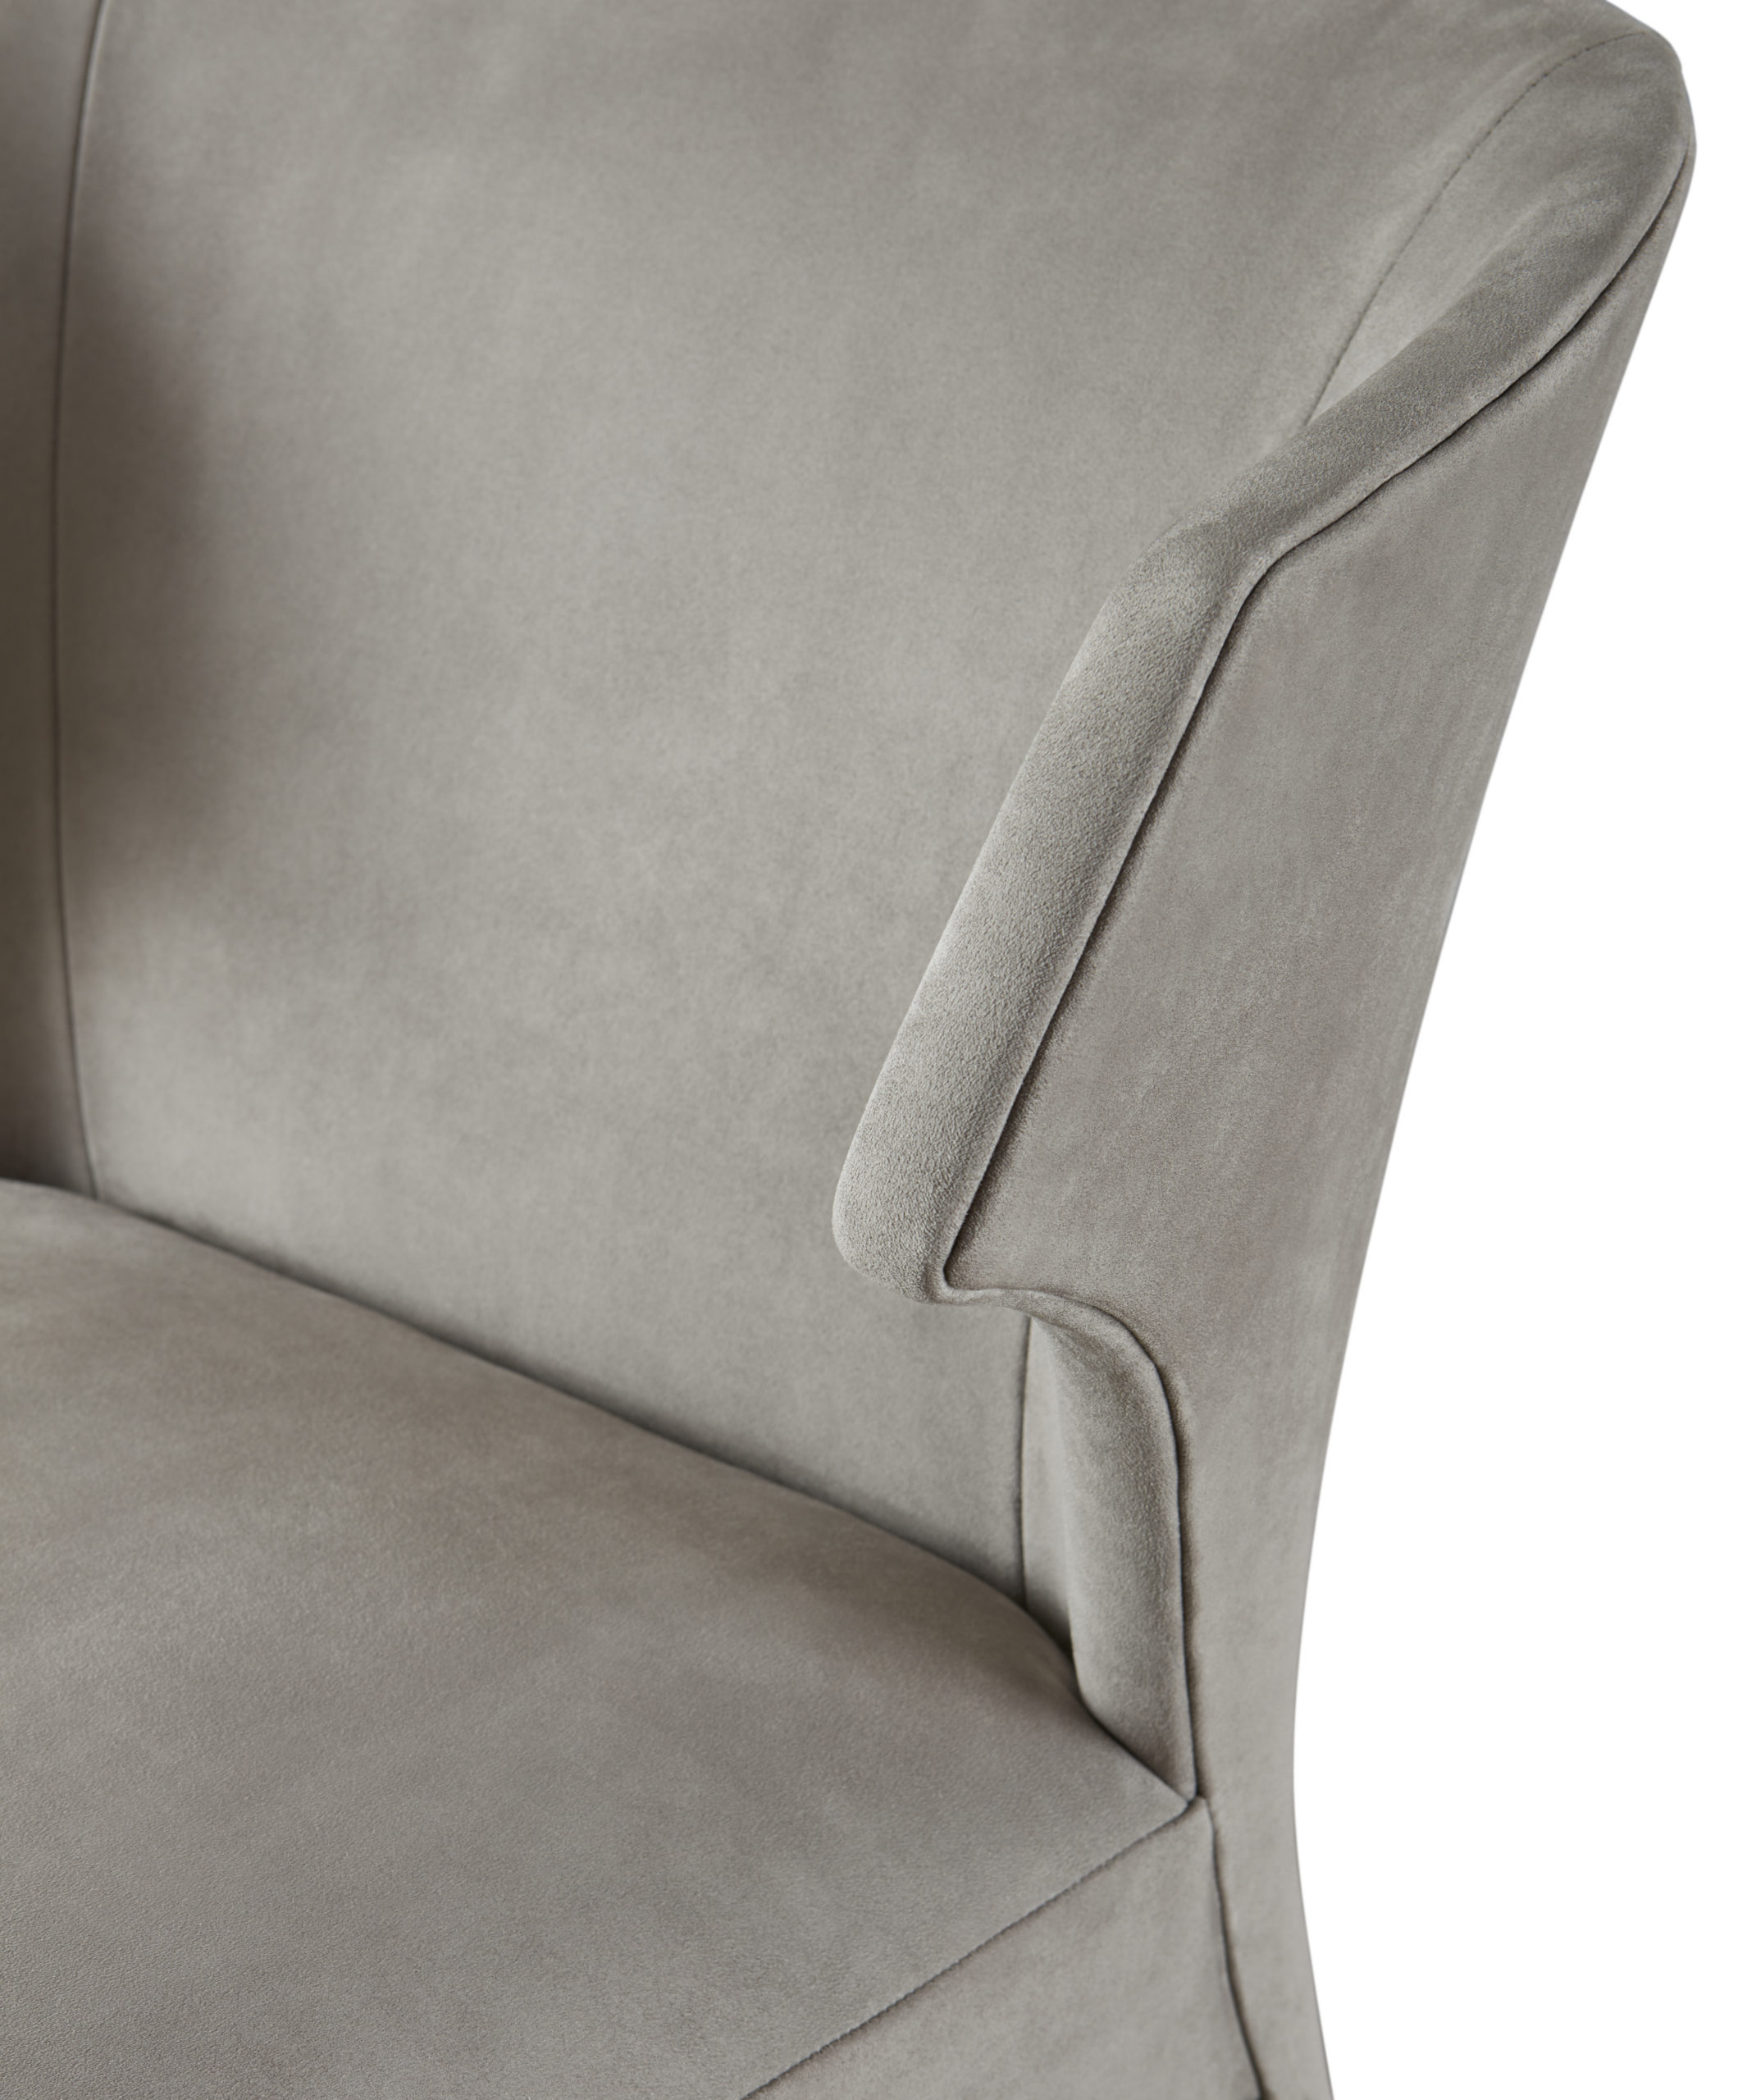 Baker_products_WNWN_lapel_lounge_chair_BAU3101c_DETAIL-scaled-2